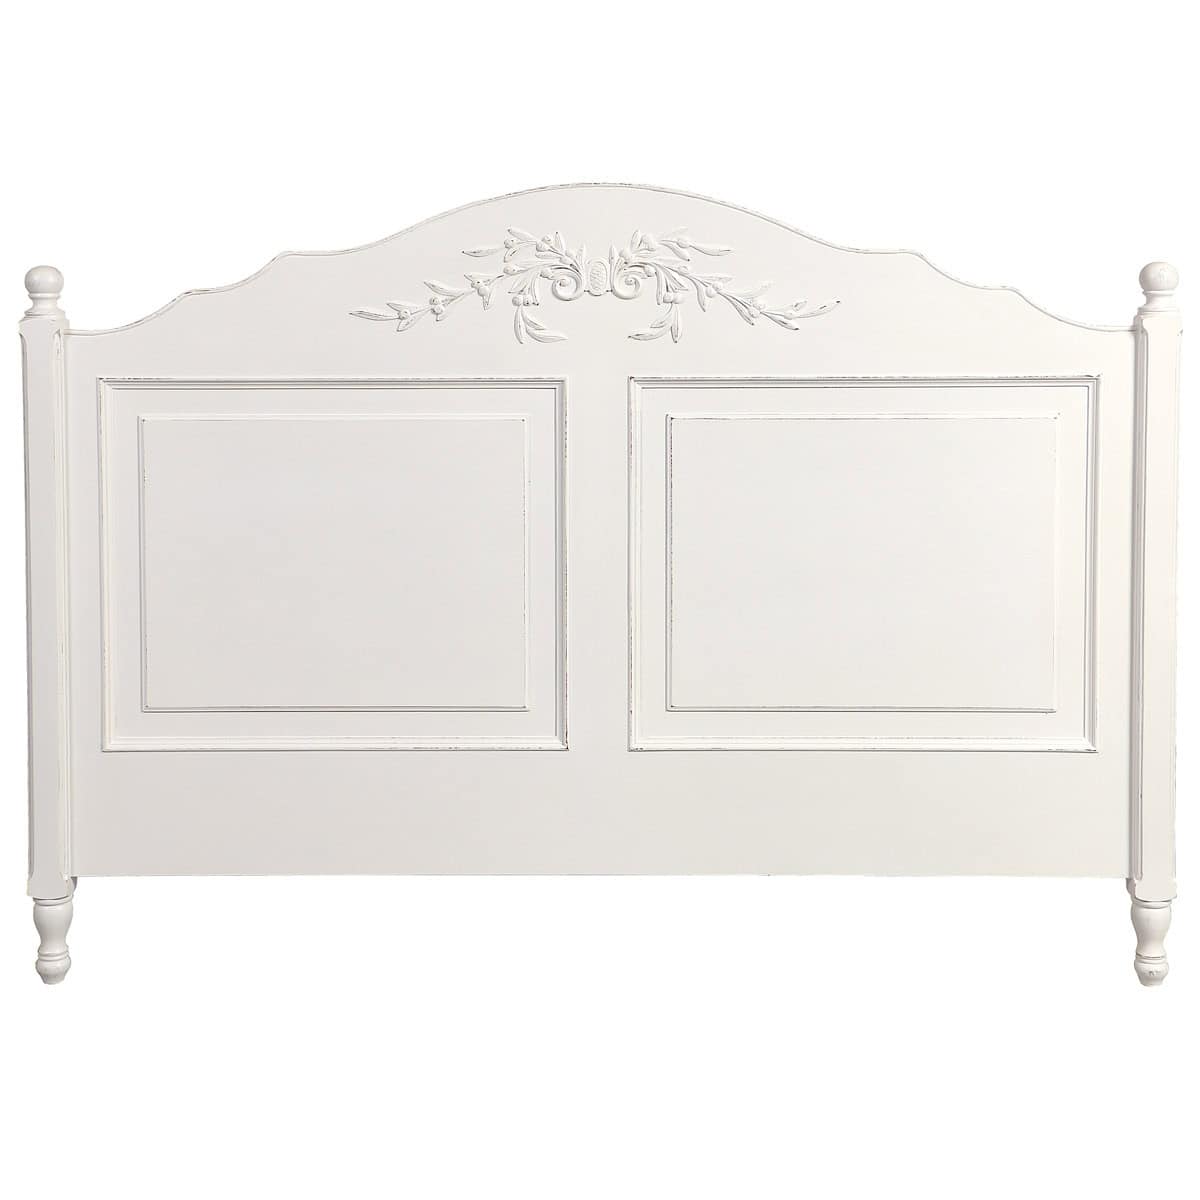 French Headboard For King Or Queen, French Headboard Queen